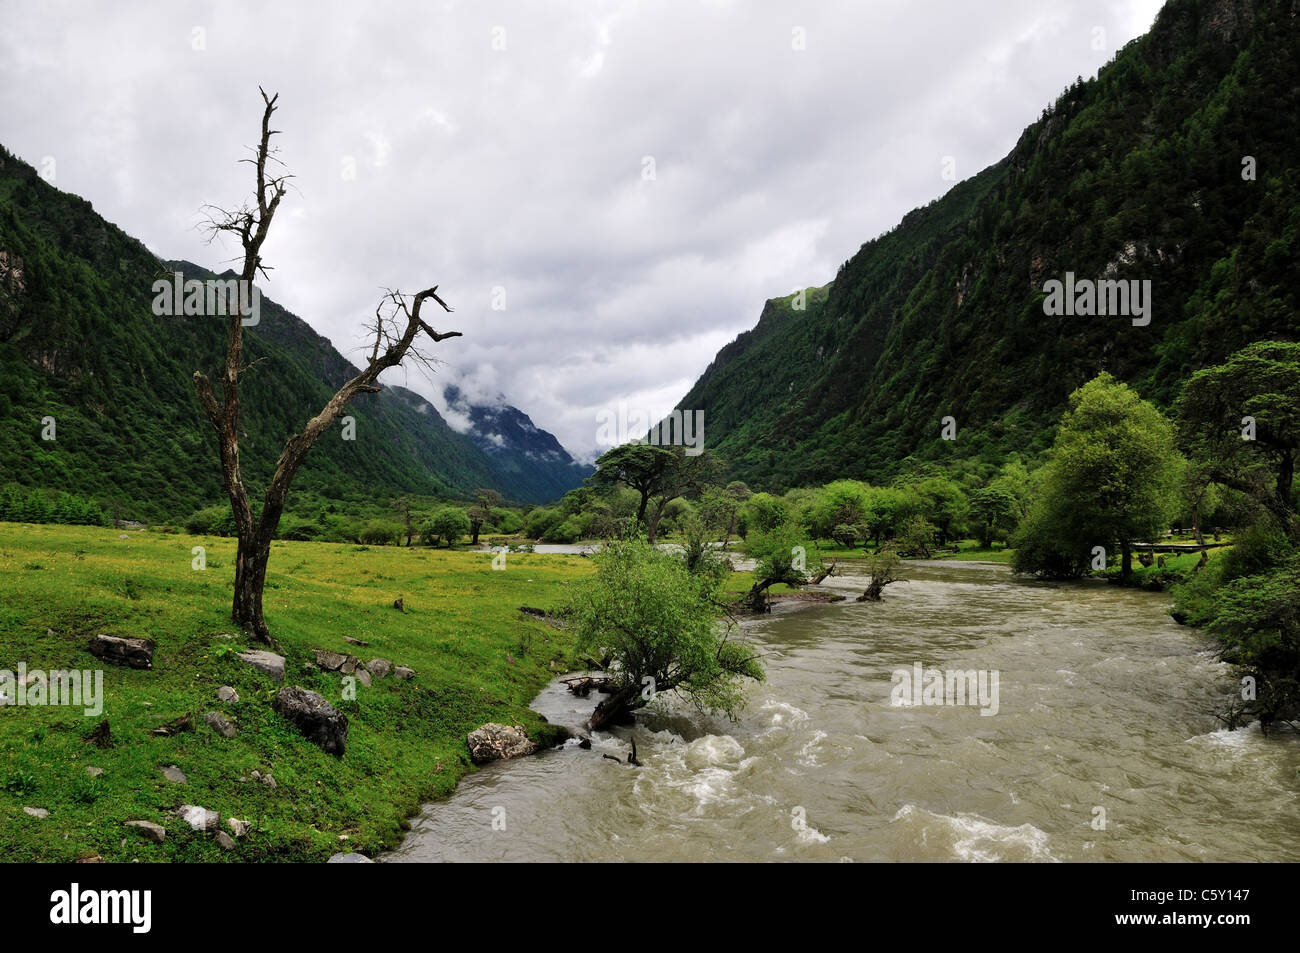 River running in a mountain valley. Siguniang Shan Nature Reserve, Sichuan, China. Stock Photo